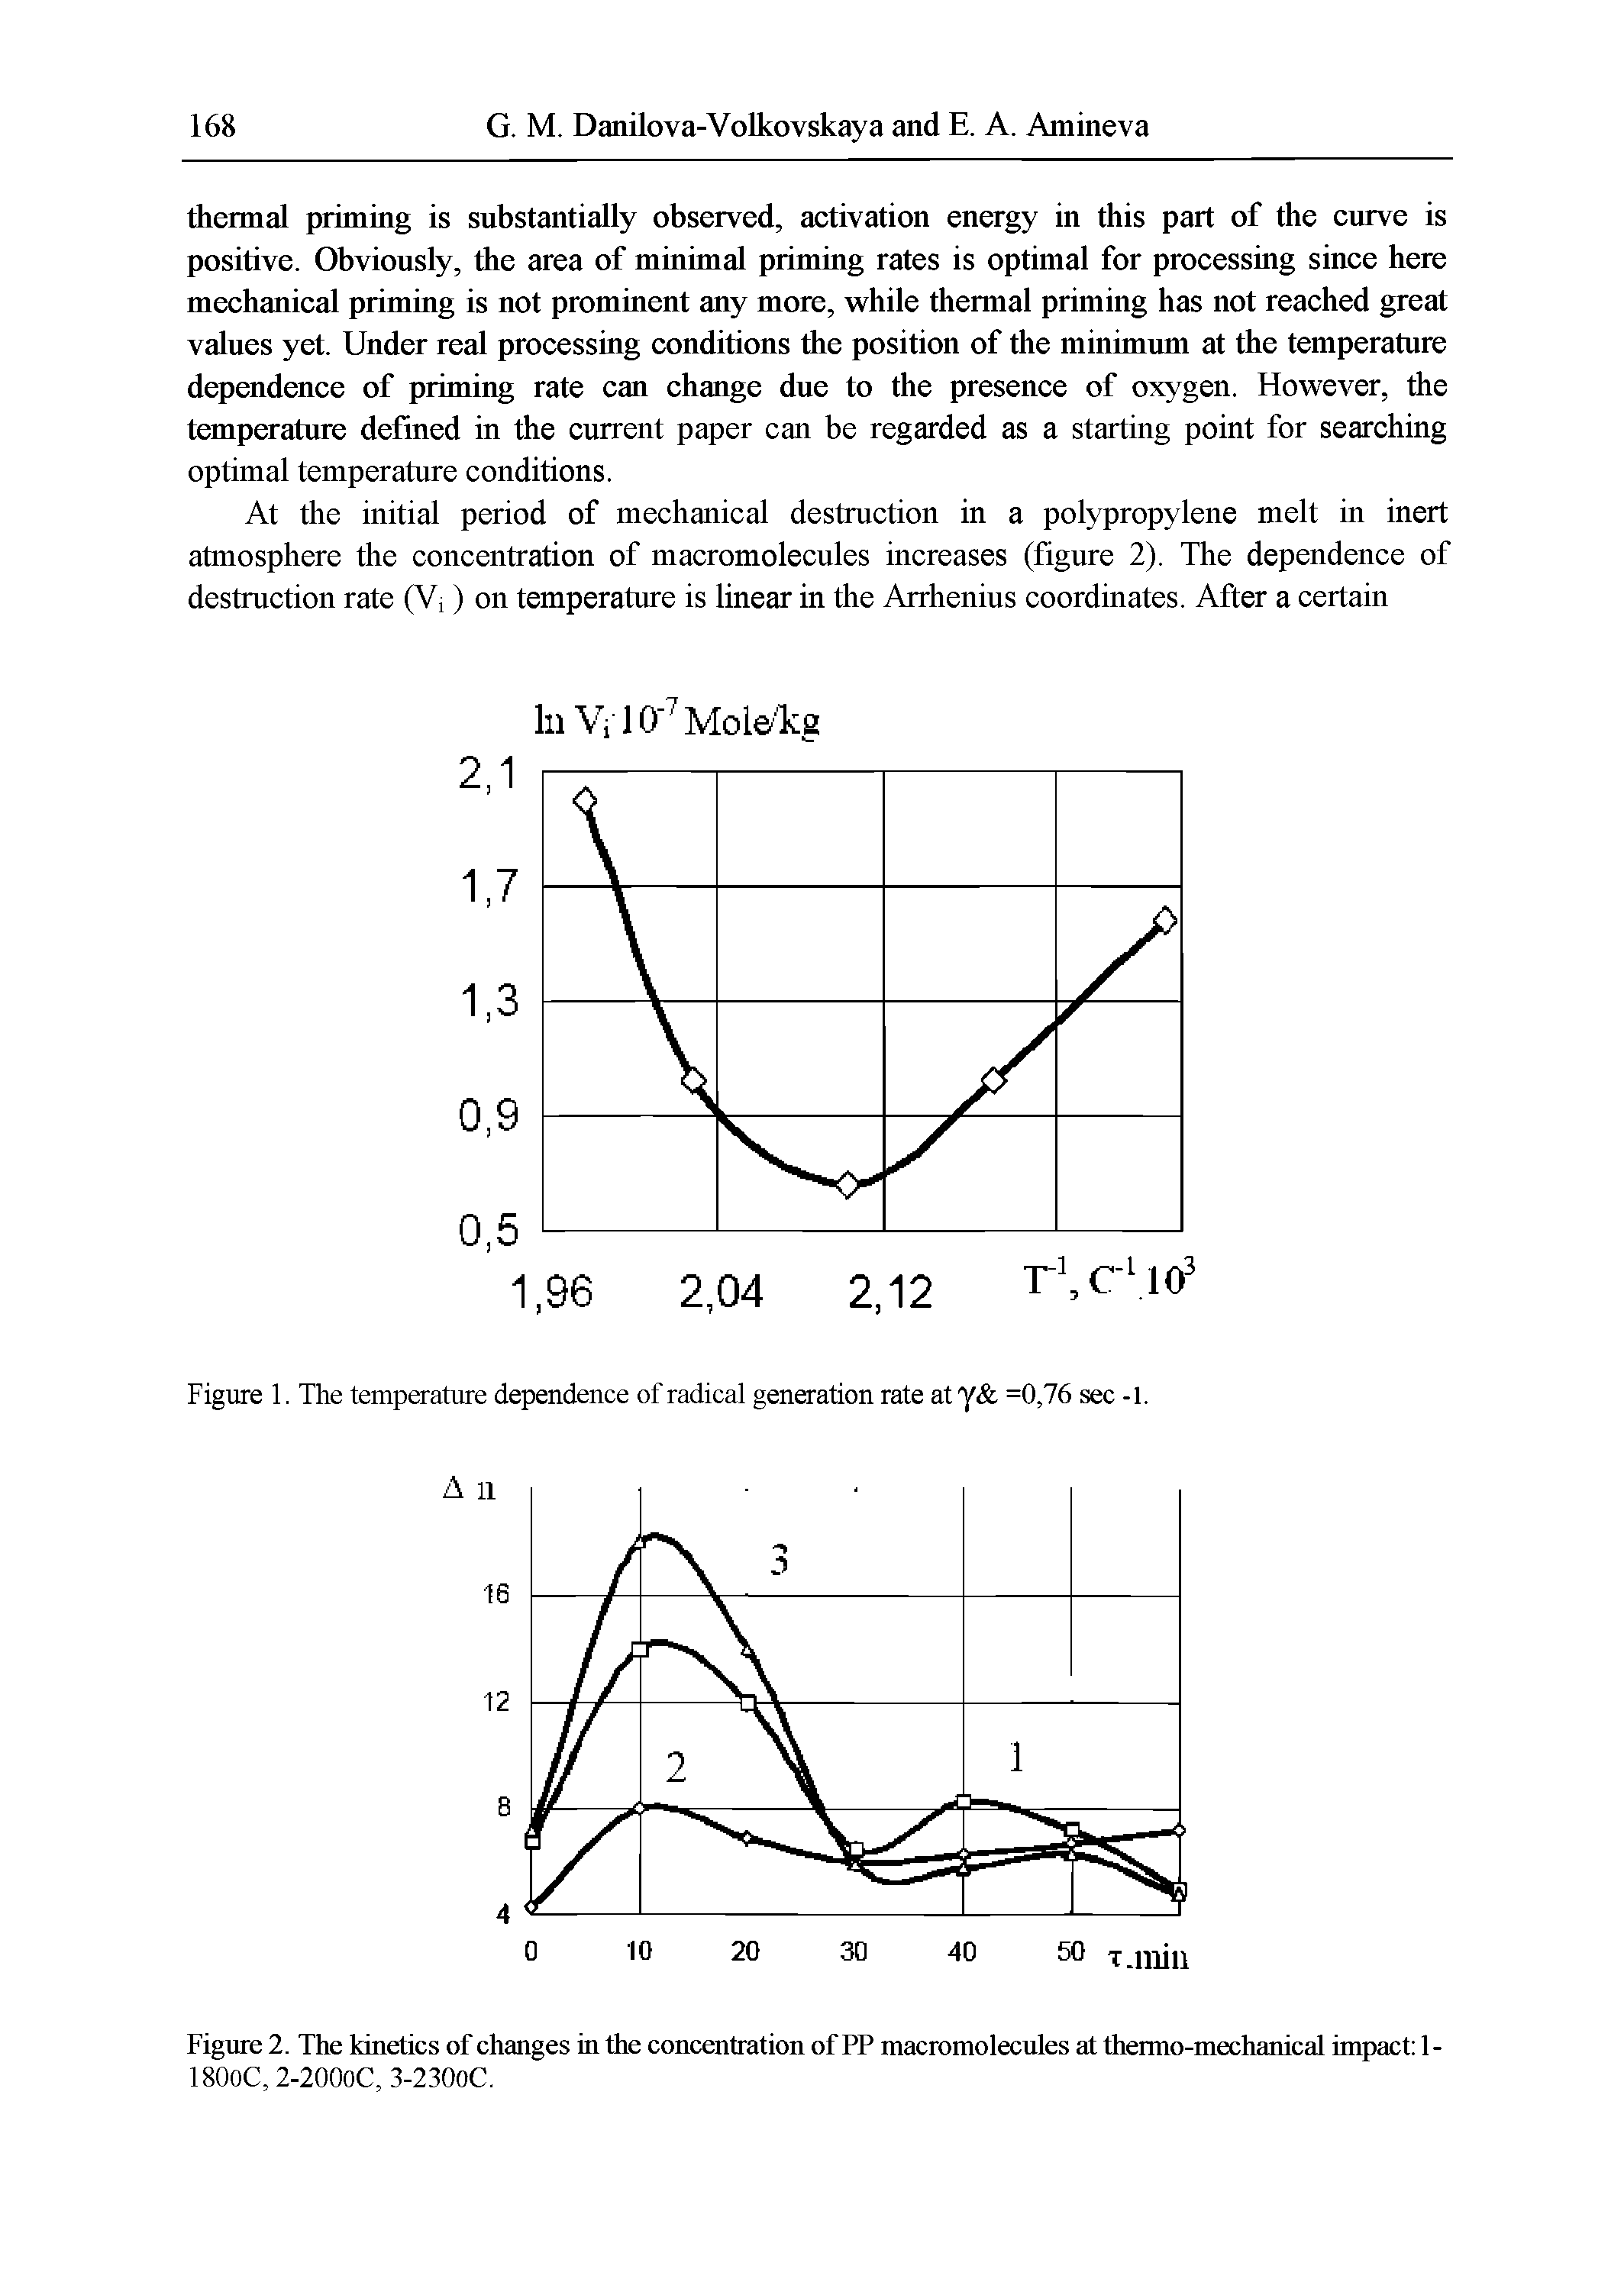 Figure 2. The kinetics of changes in the concentration of PP macromolecules at thermo-mechanical impact 1-...